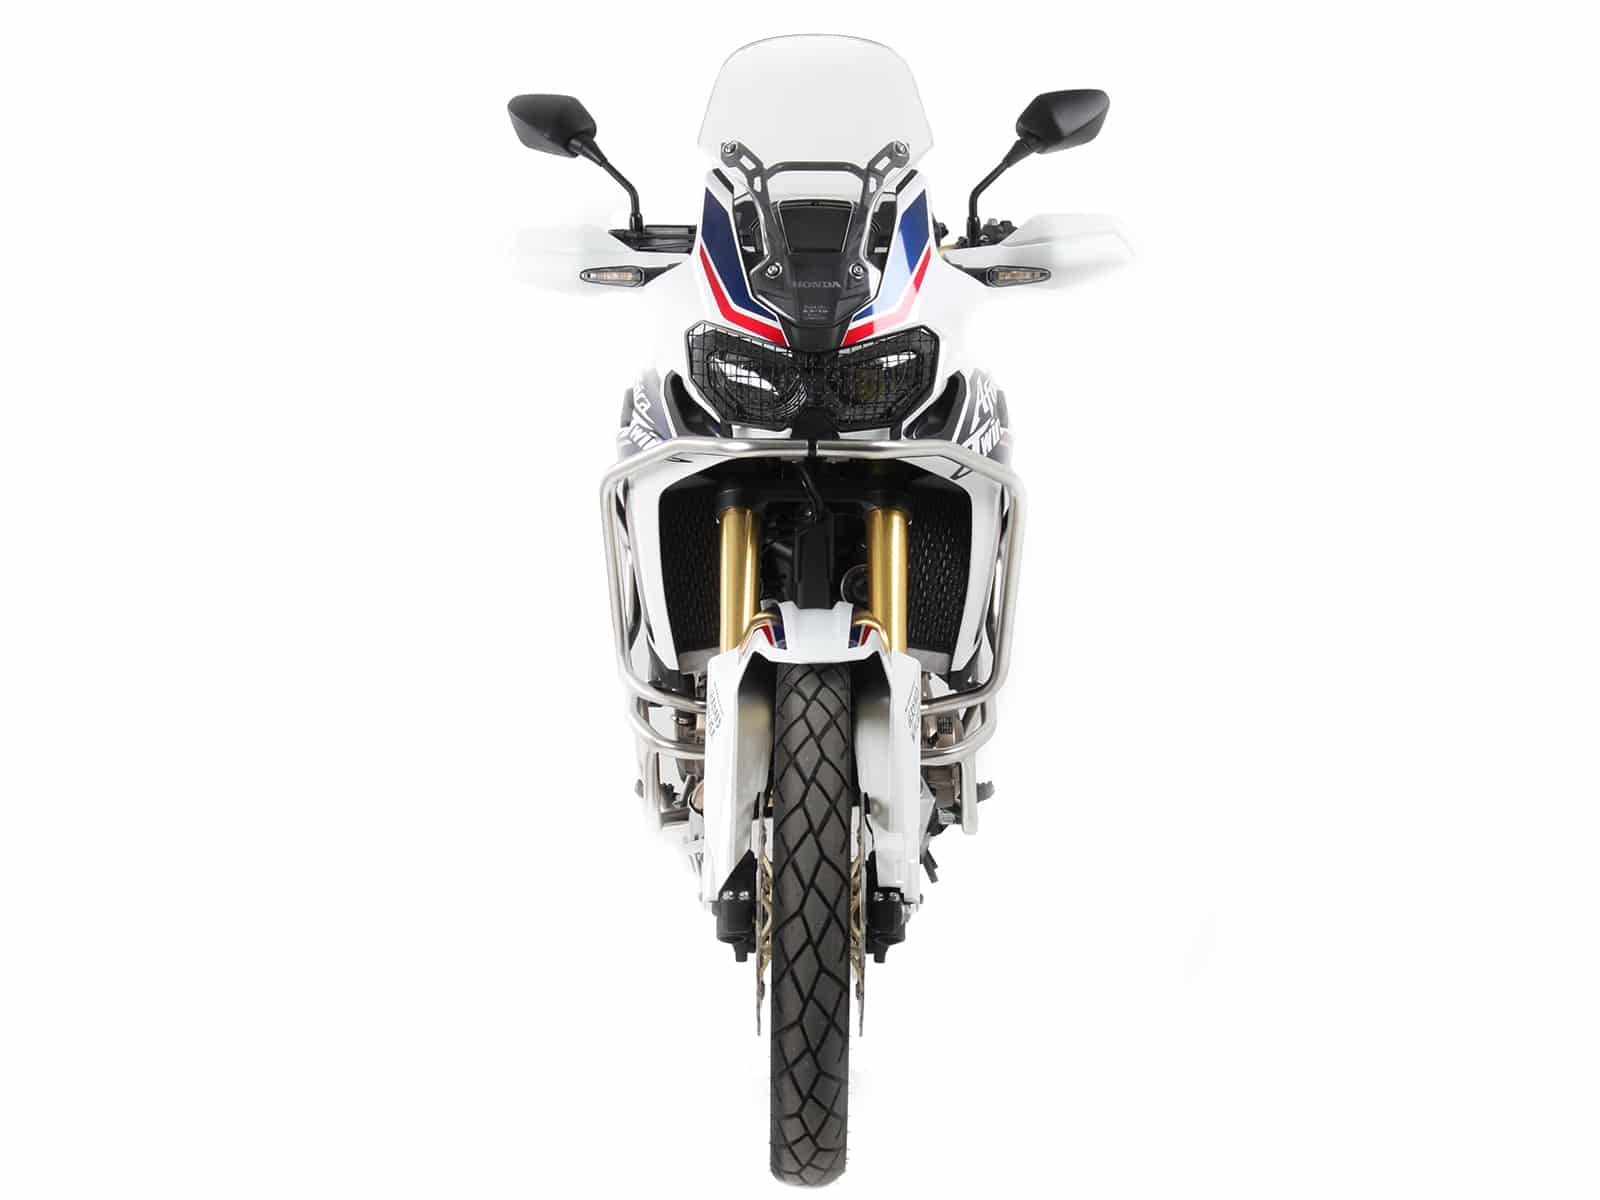 Tankguard stainless steel for Honda CRF 1000 Africa Twin (2016-2017)